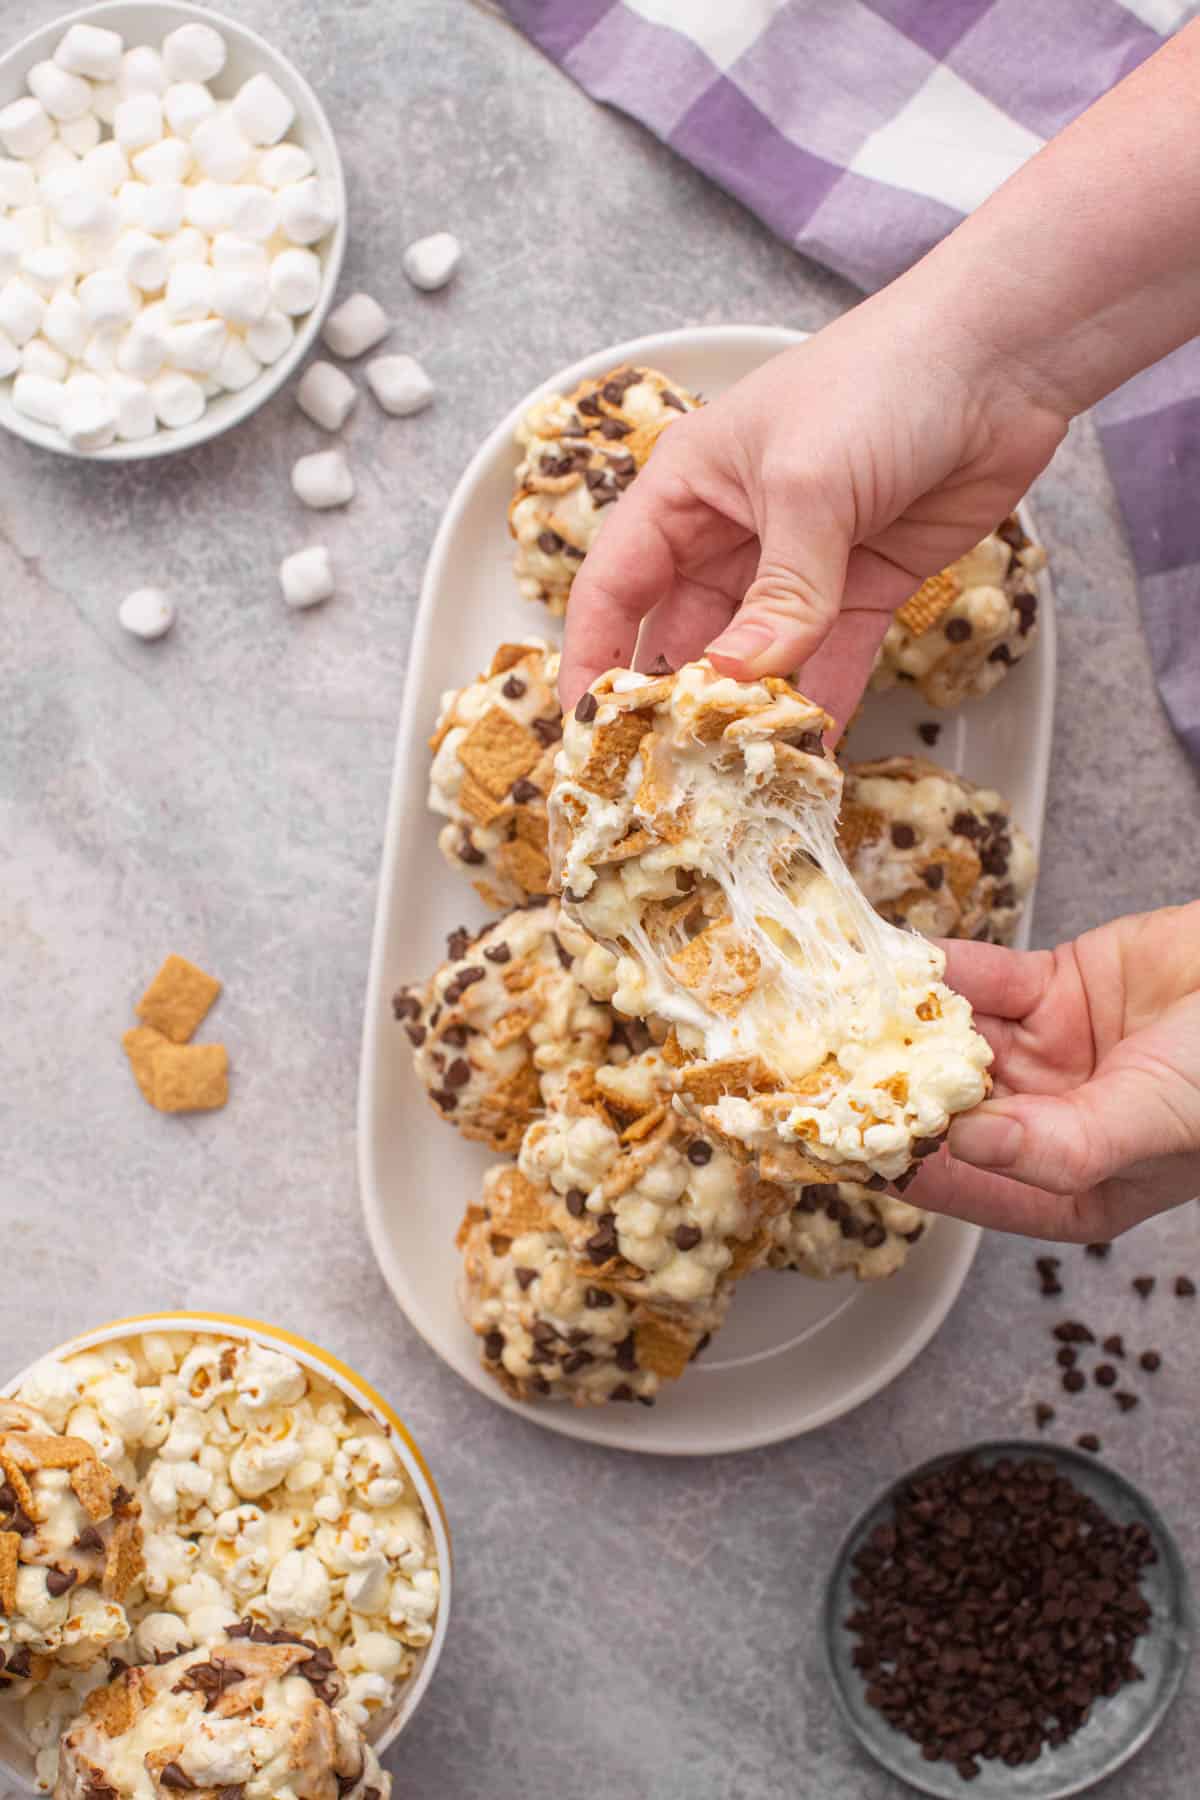 Hands pulling apart a s'mores popcorn ball to showcase the stretchy, gooey marshmallow that holds it together.